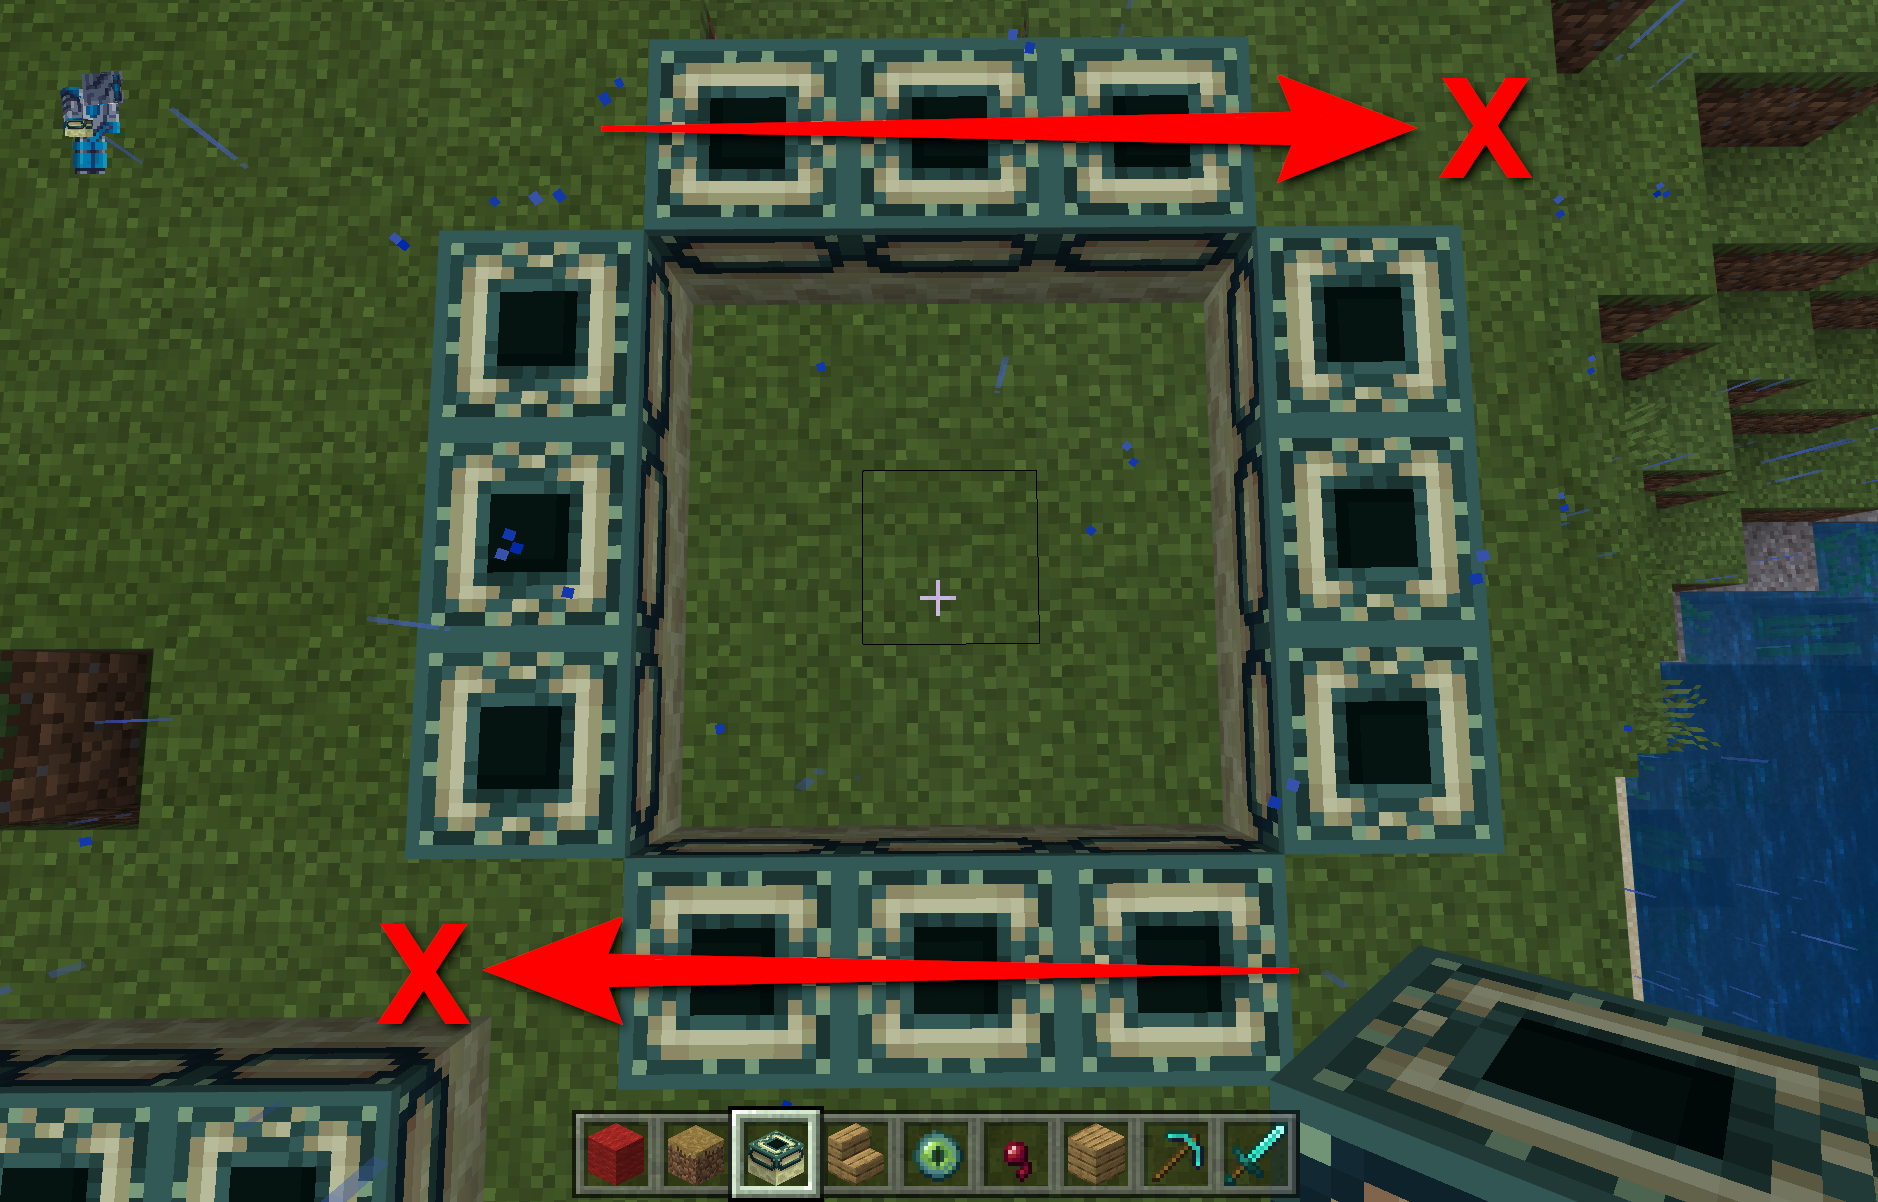 5 Ways to Find the End Portal in Minecraft - wikiHow